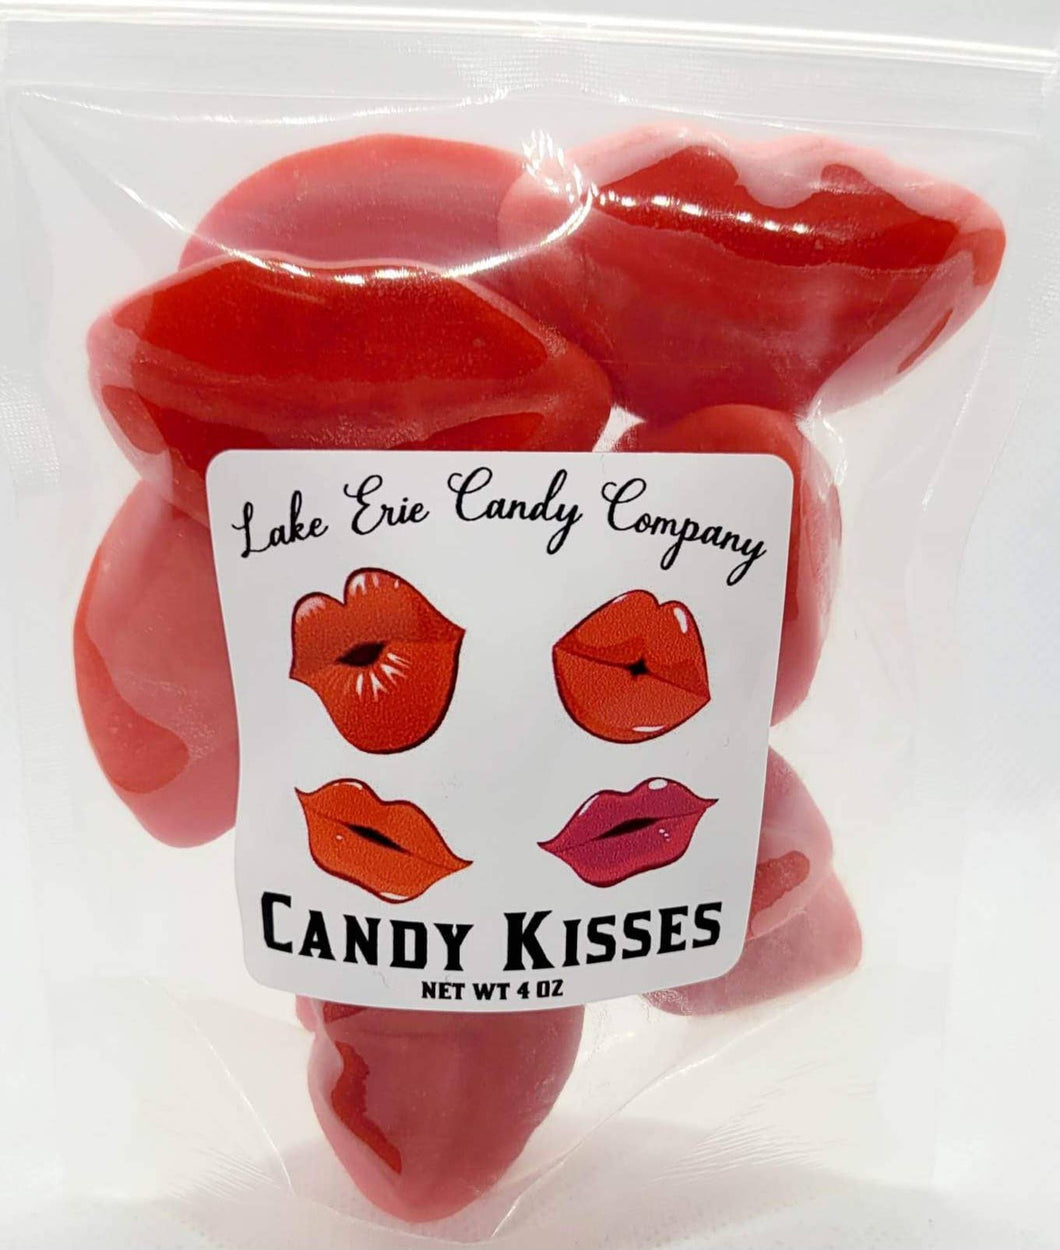 Lake Erie Candy Company - Candy Kisses